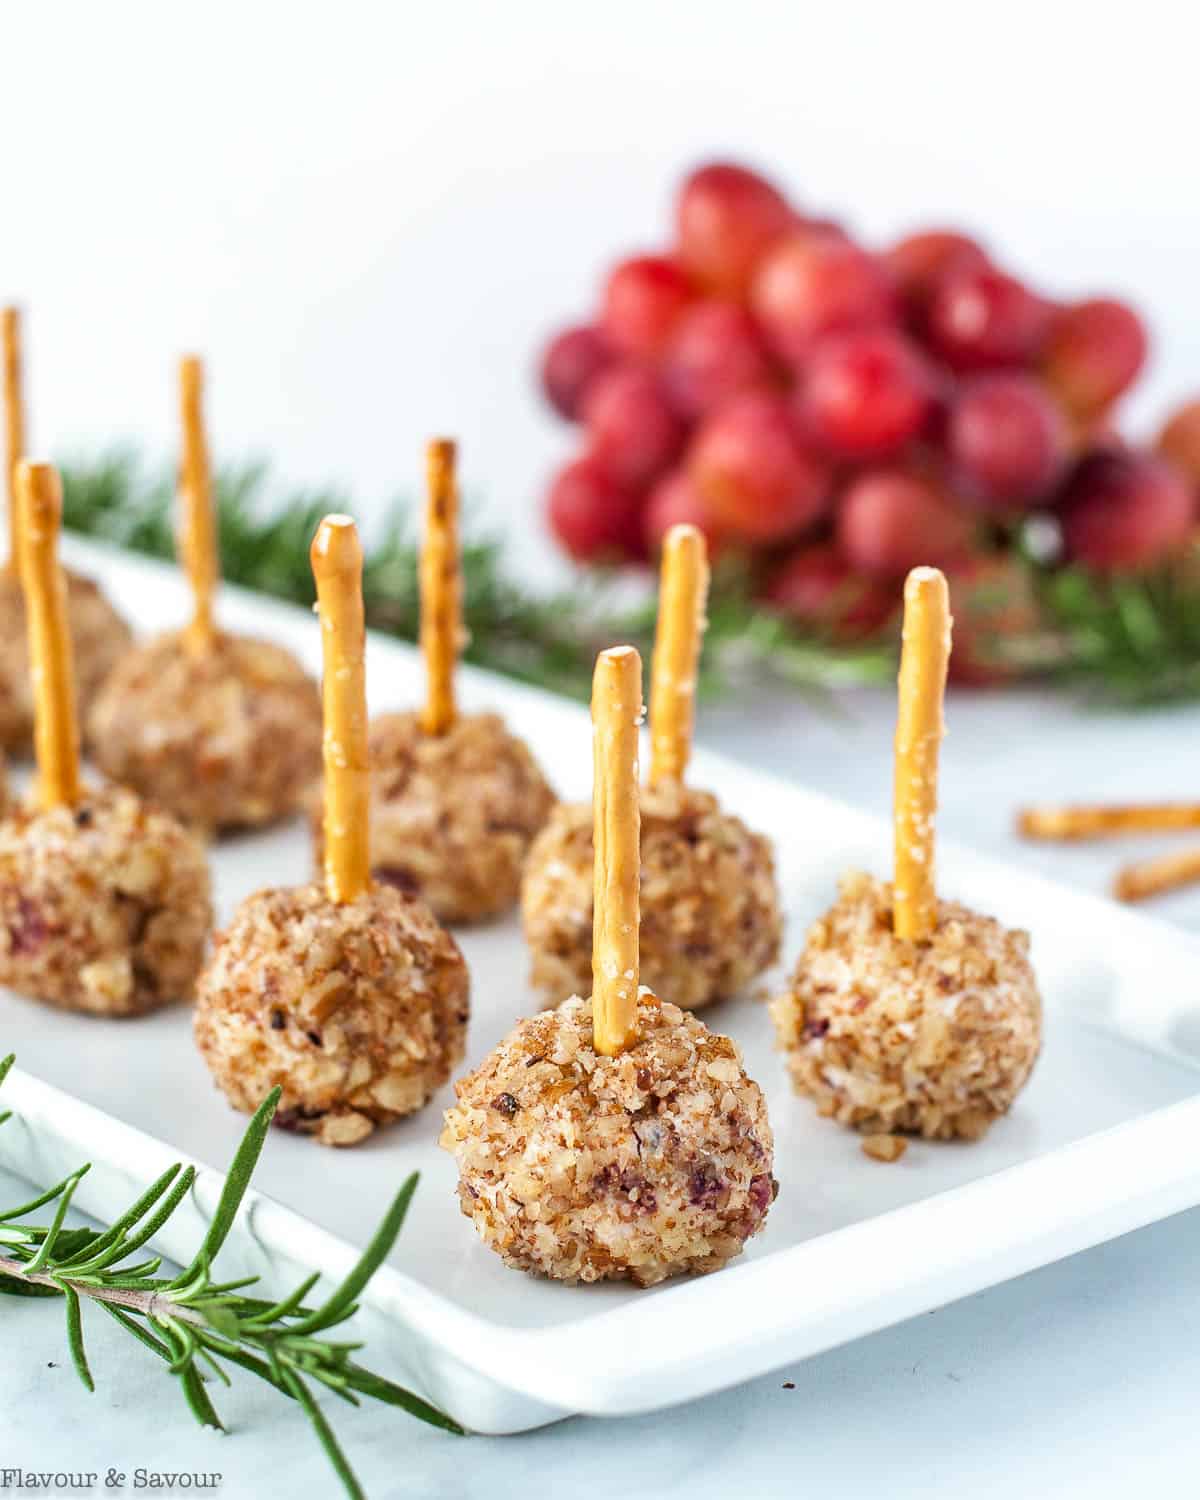 Mini Cheese Balls on a Stick-Fun Finger Food - Flavour and Savour